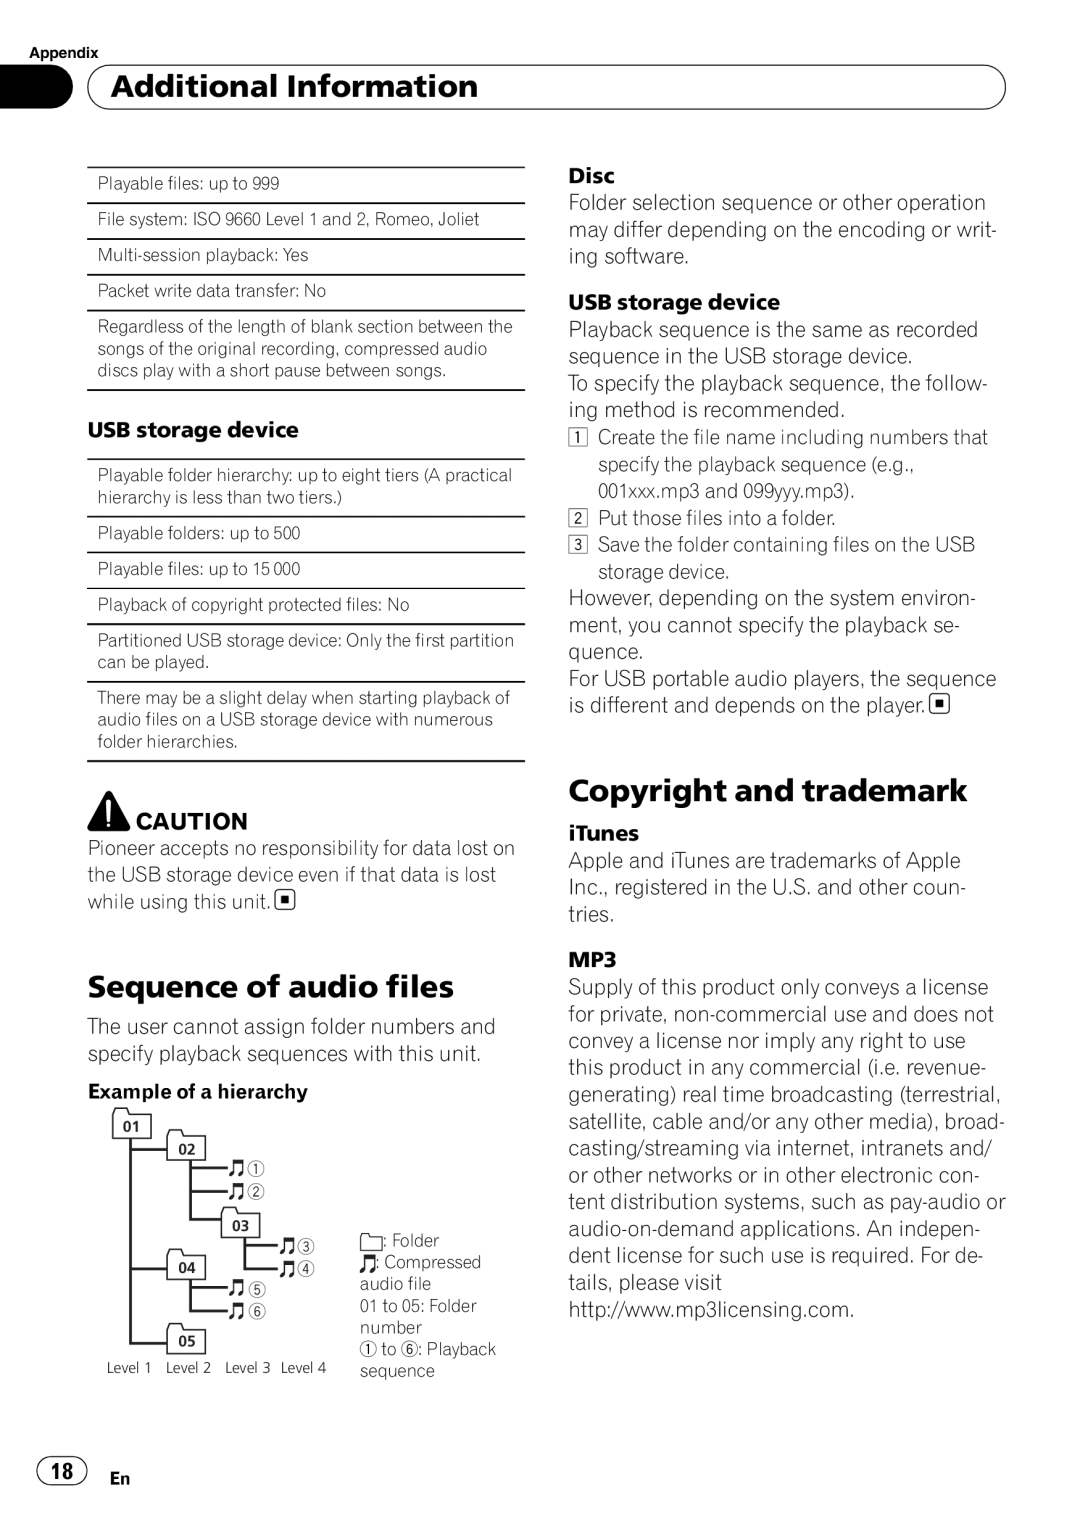 Pioneer DEH-22UB owner manual Sequence of audio files, Copyright and trademark, Additional Information 